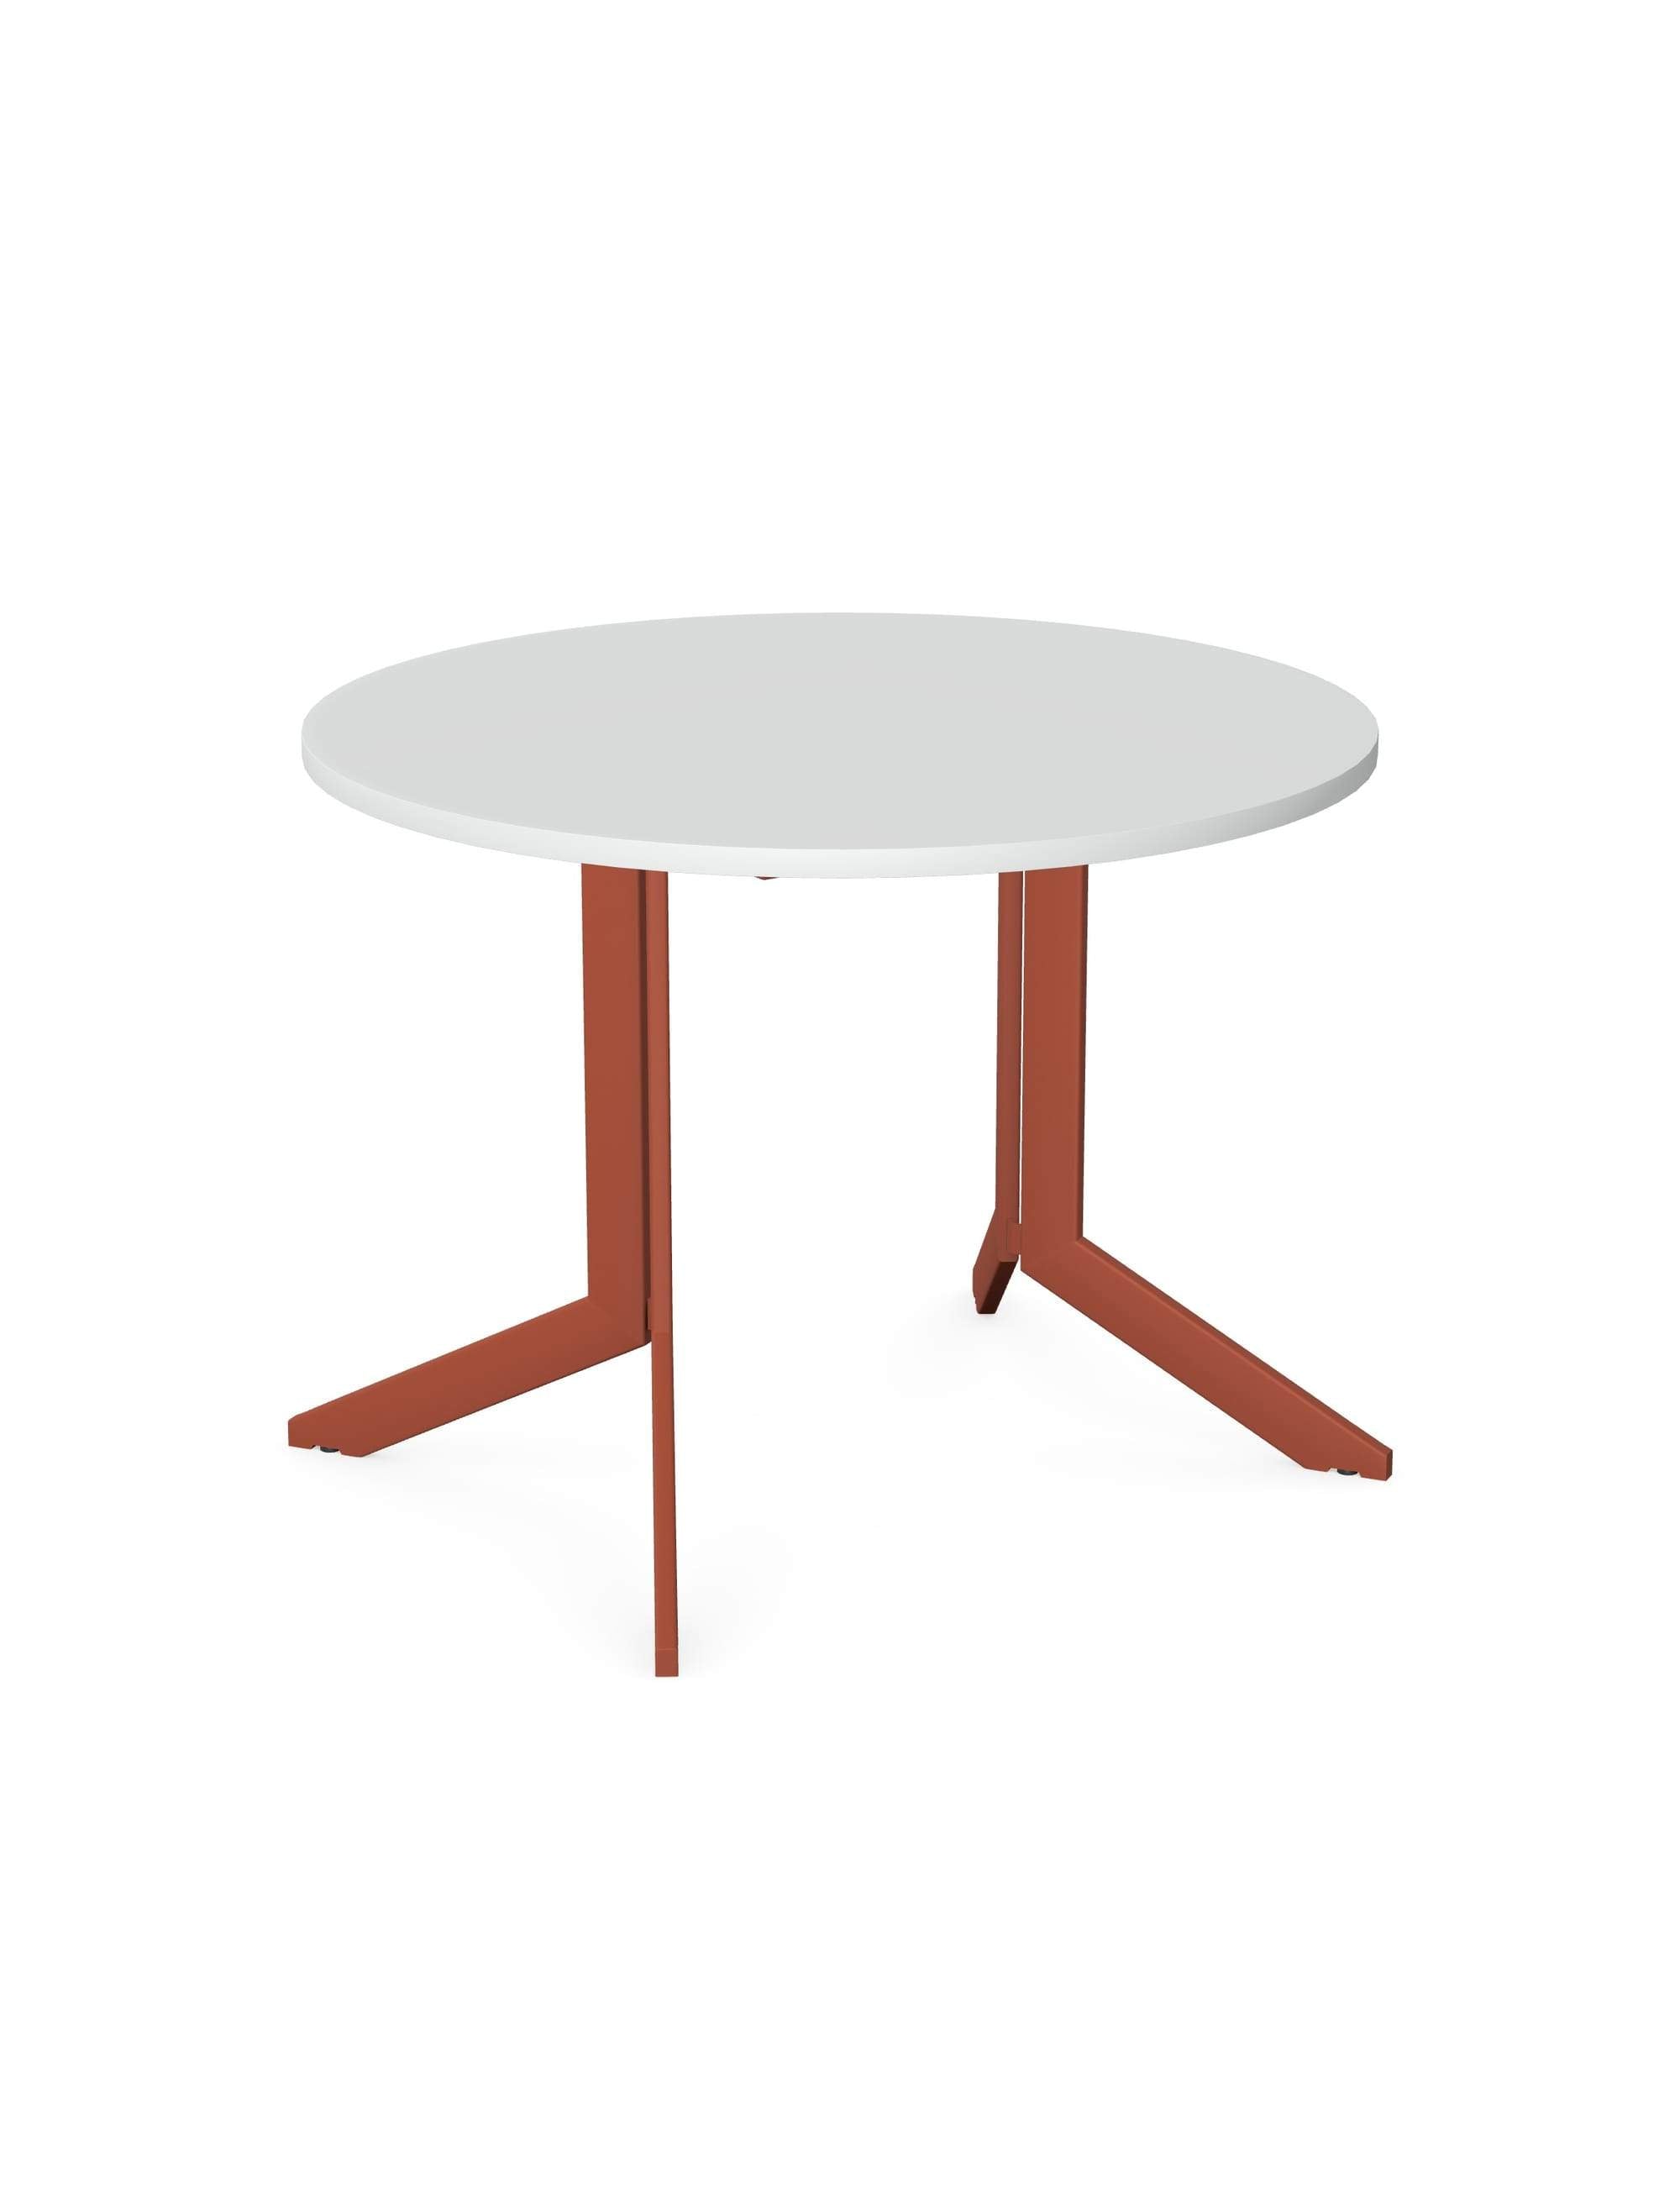 Axy-Line - Occasional Tables, Round Tops, Leg-X